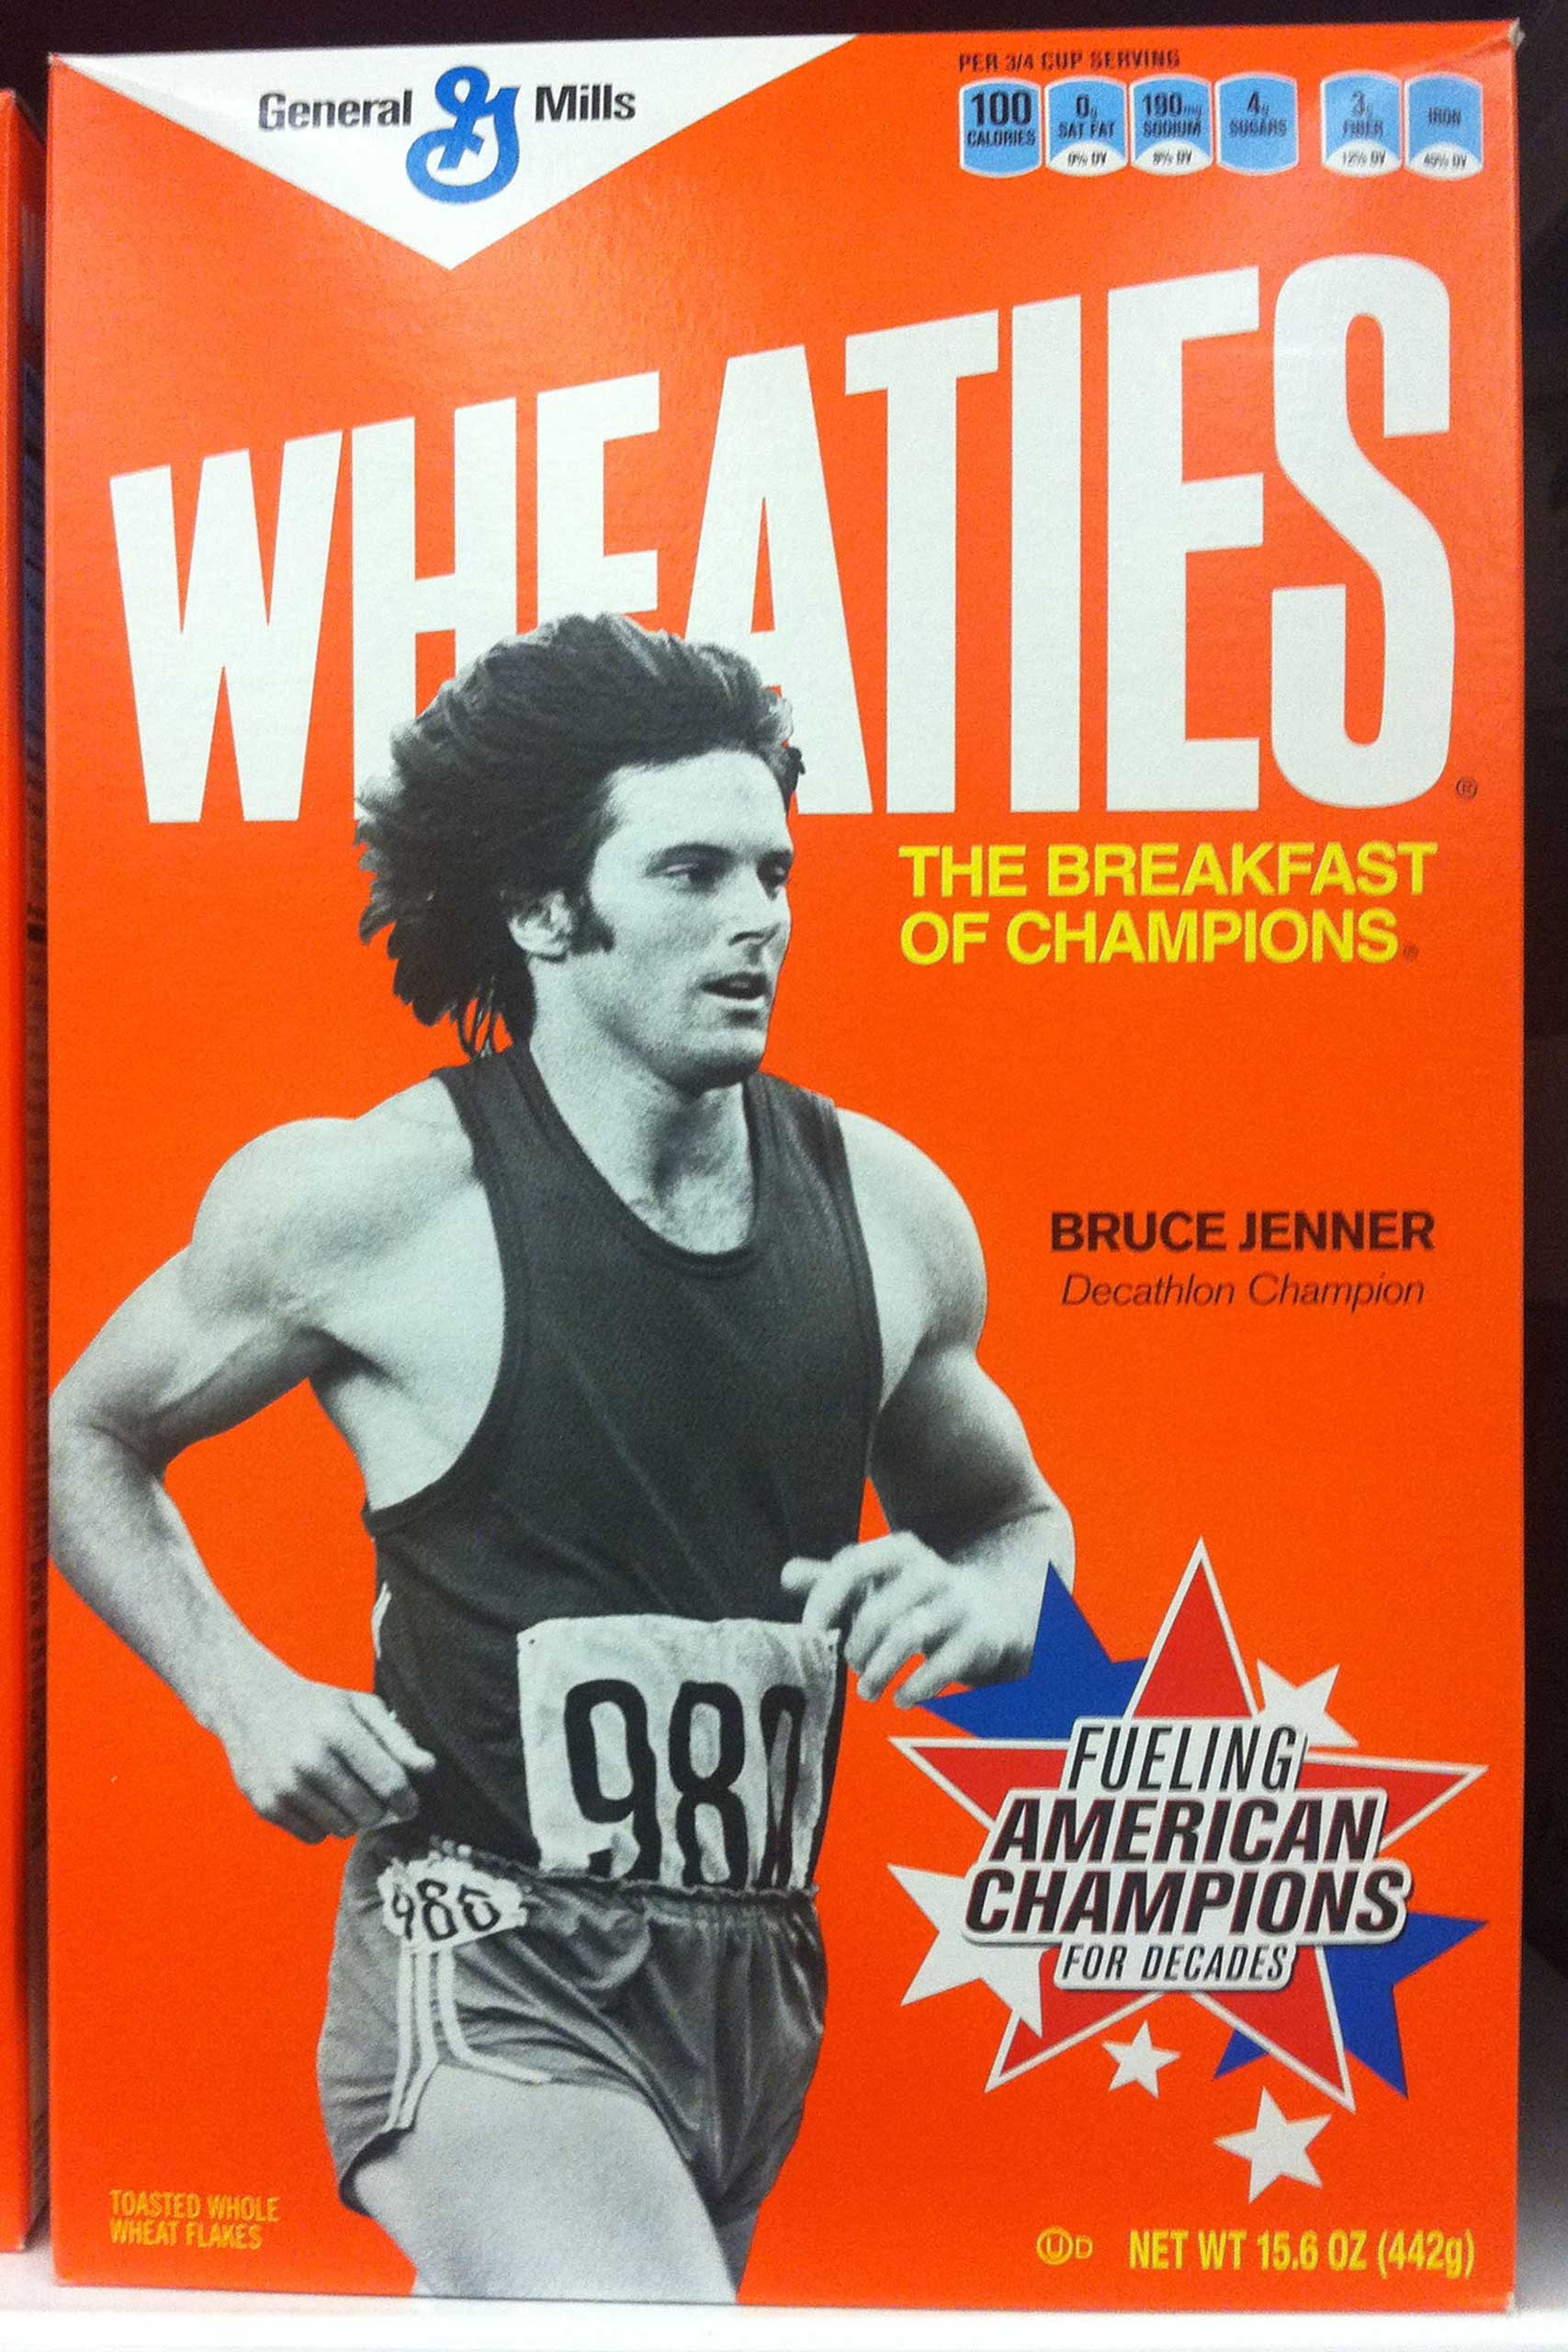 Bruce Jenner finds his way onto the breakfast tables of America. The 'Keeping Up with the Kardashians' star is shown in his youthful glory on the front cover of 'Wheaties' cereal boxes on sale now.